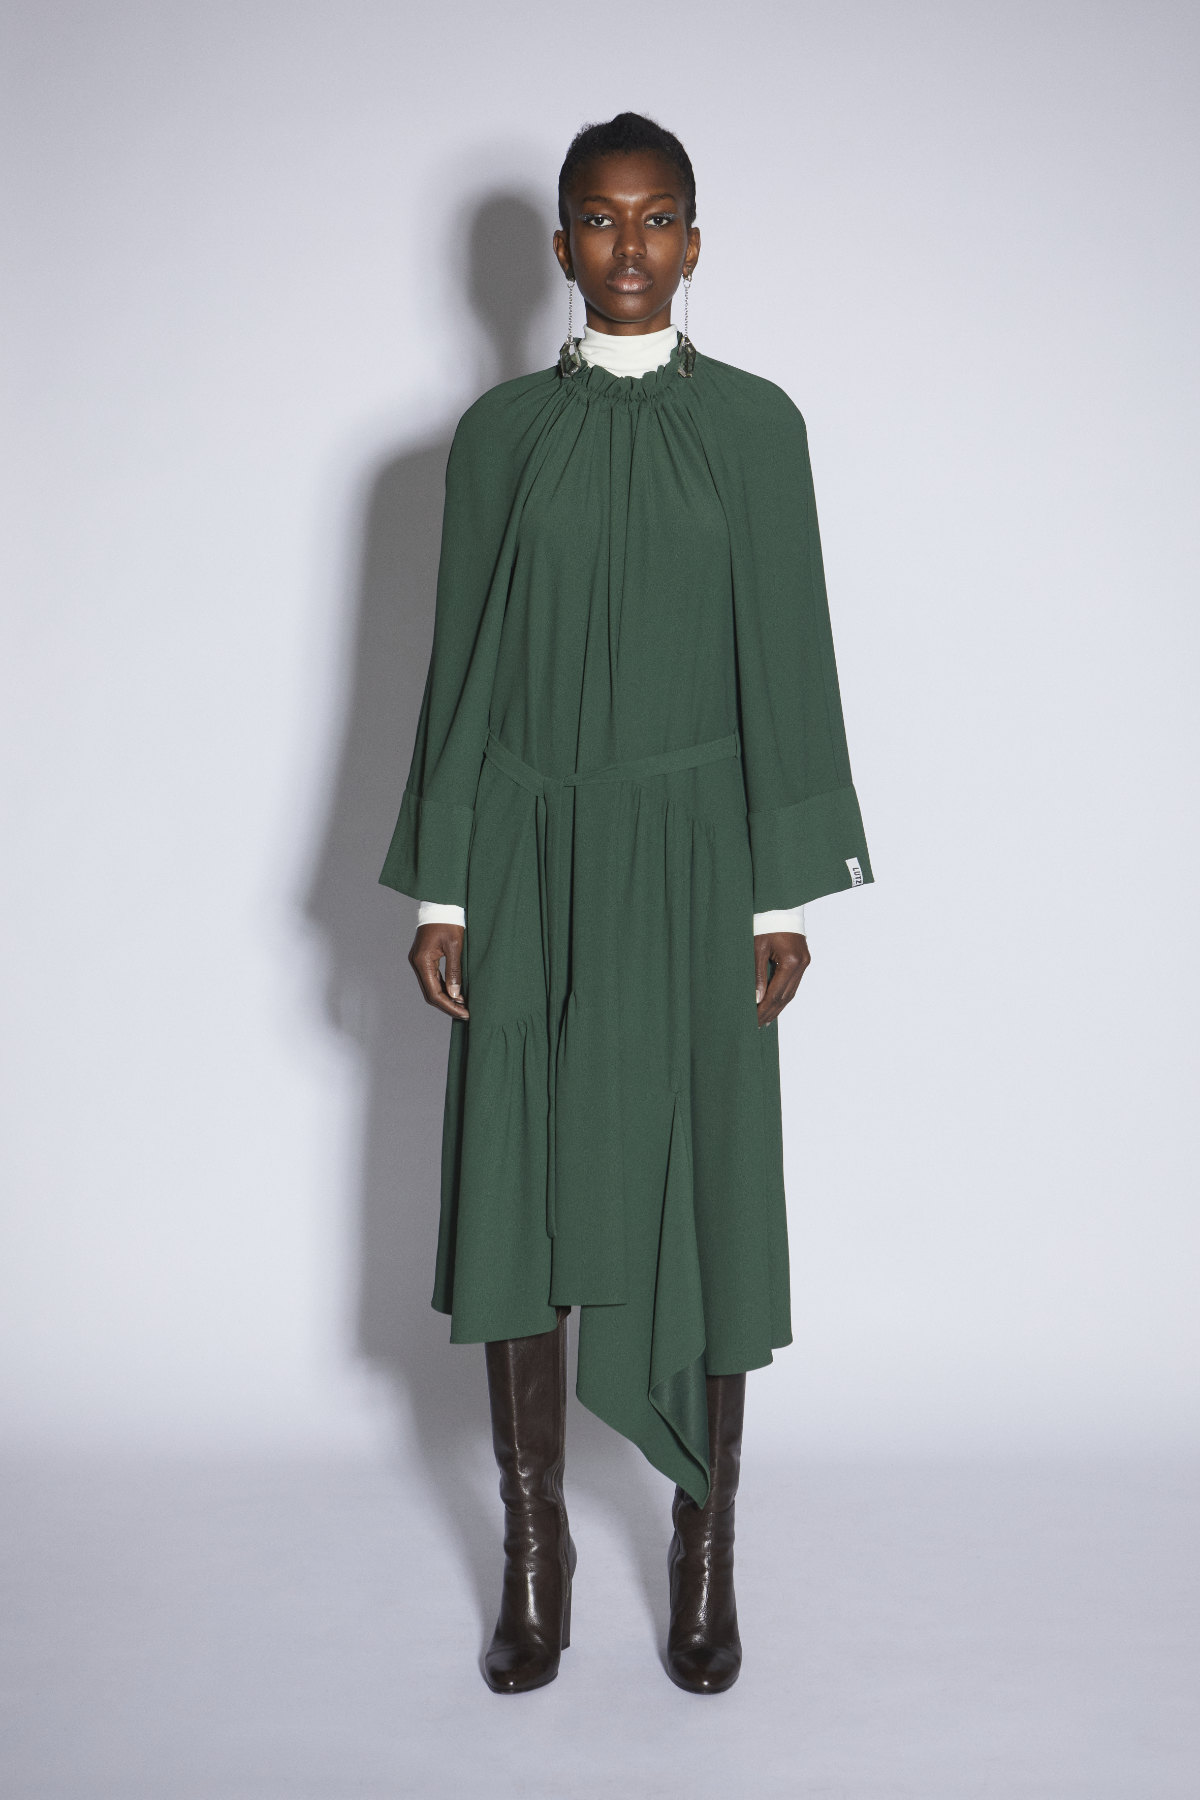 Lutz Huelle Presents Its New Autumn Winter 2022 Collection